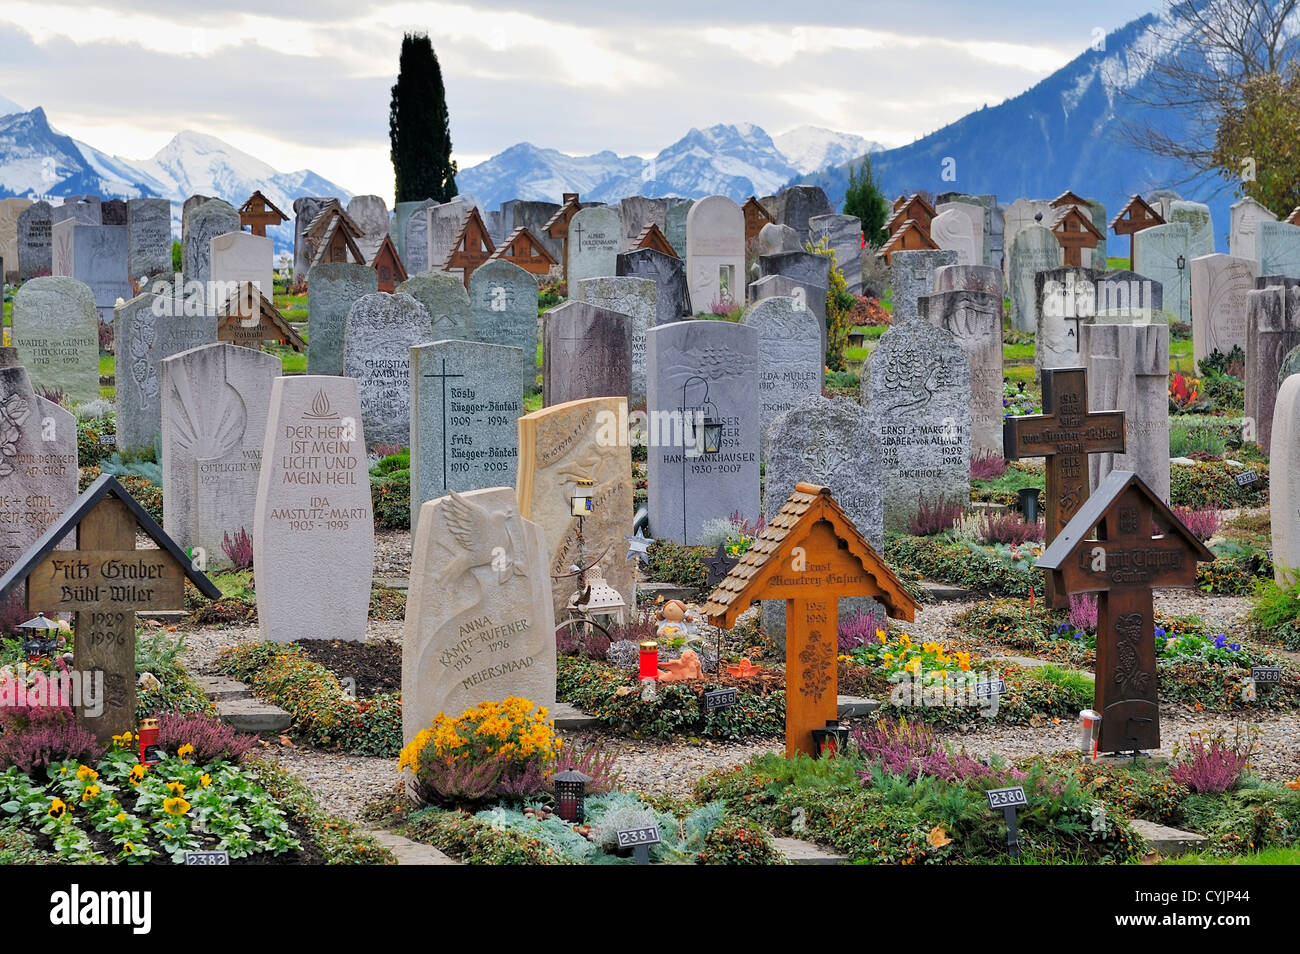 Cemetery in the mountain village of Sigriswil, Bern, Switzerland Stock Photo